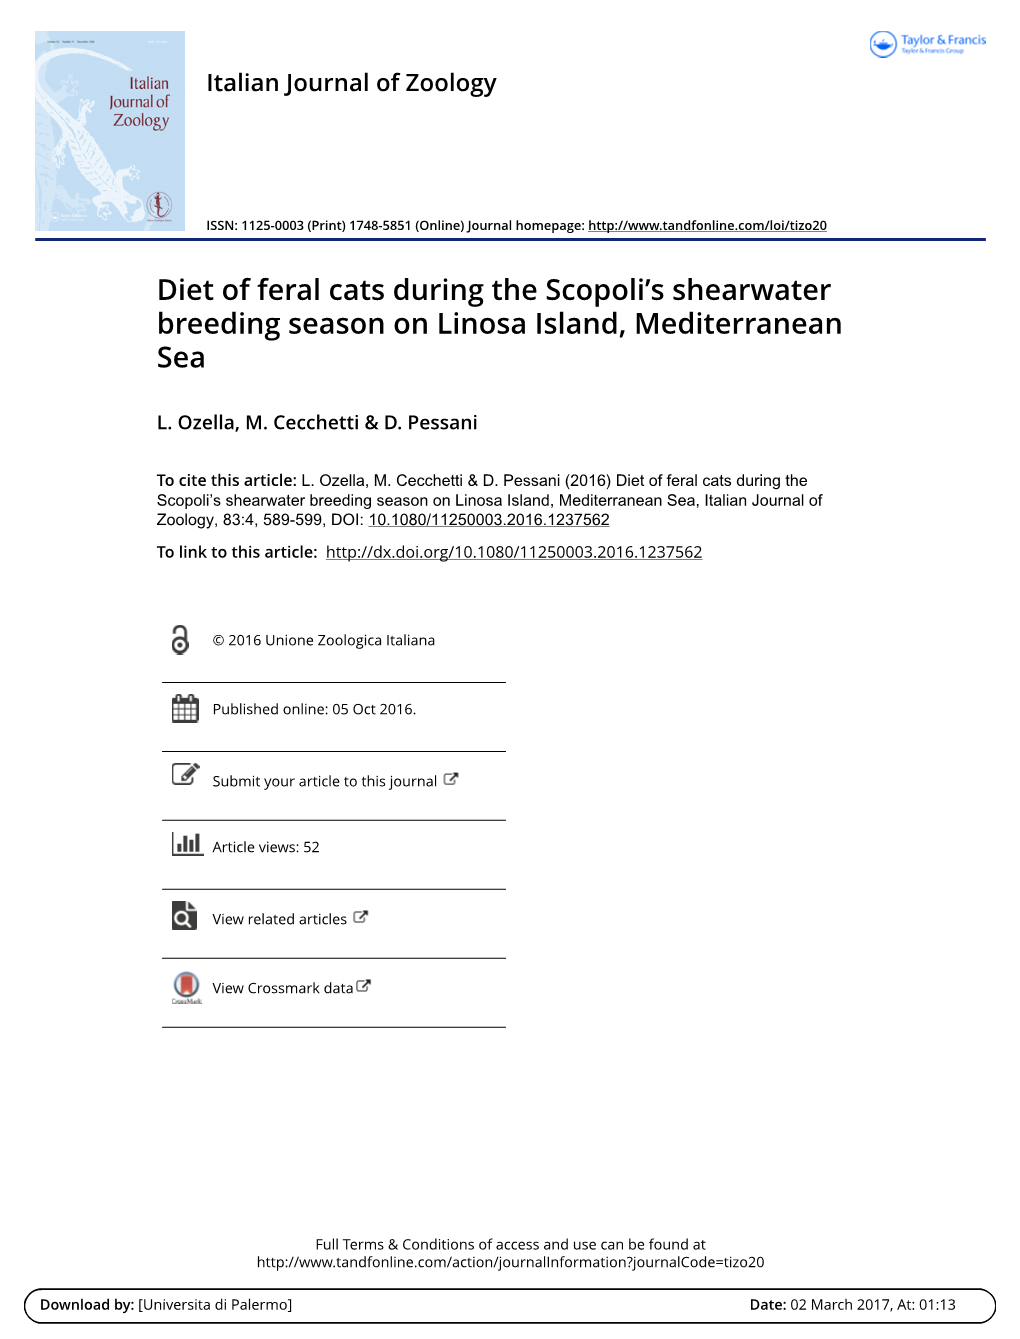 Diet of Feral Cats During the Scopoli's Shearwater